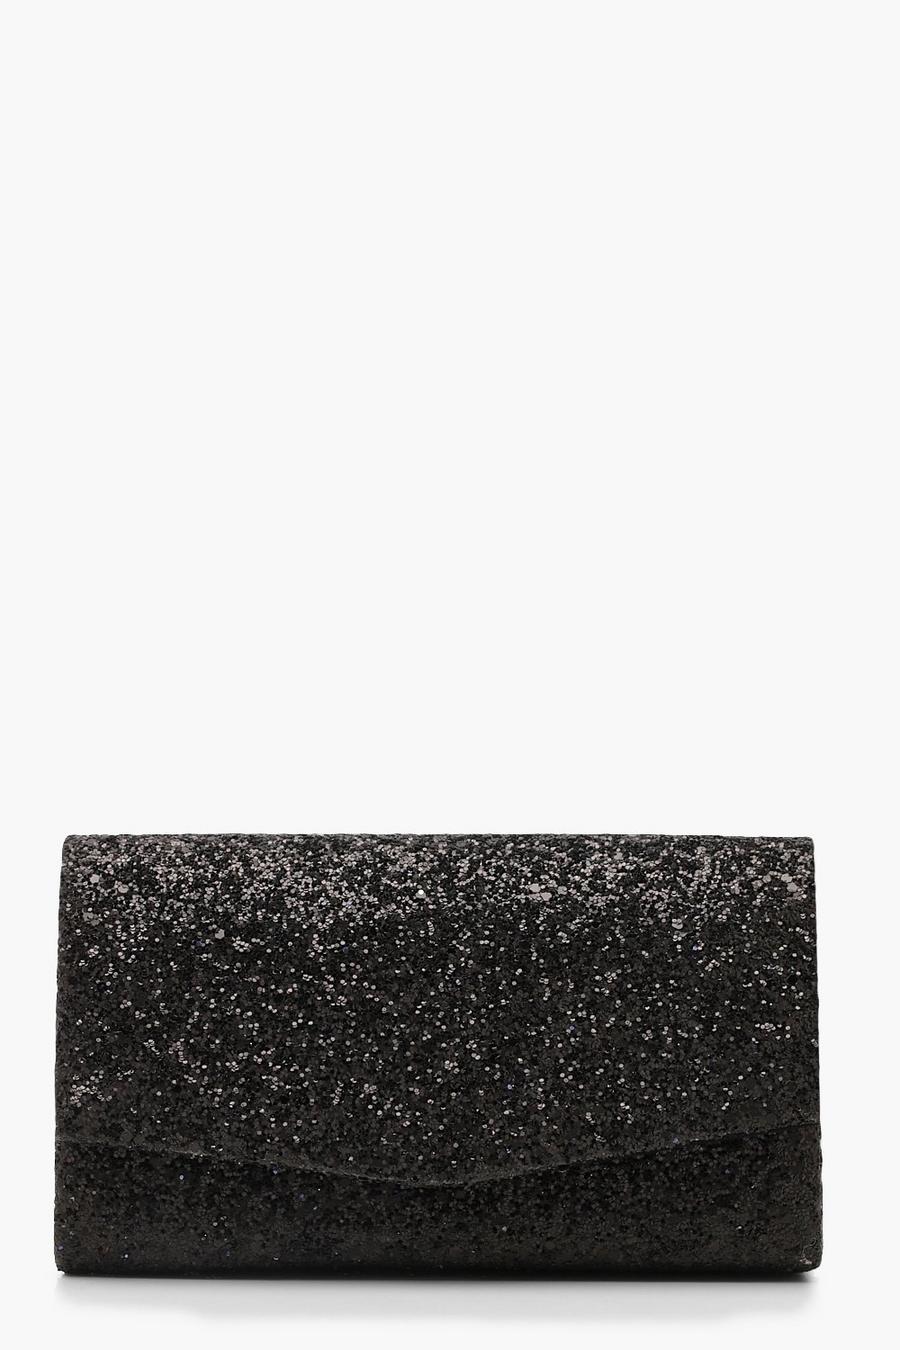 Black Chunky Glitter Structured Clutch Bag image number 1